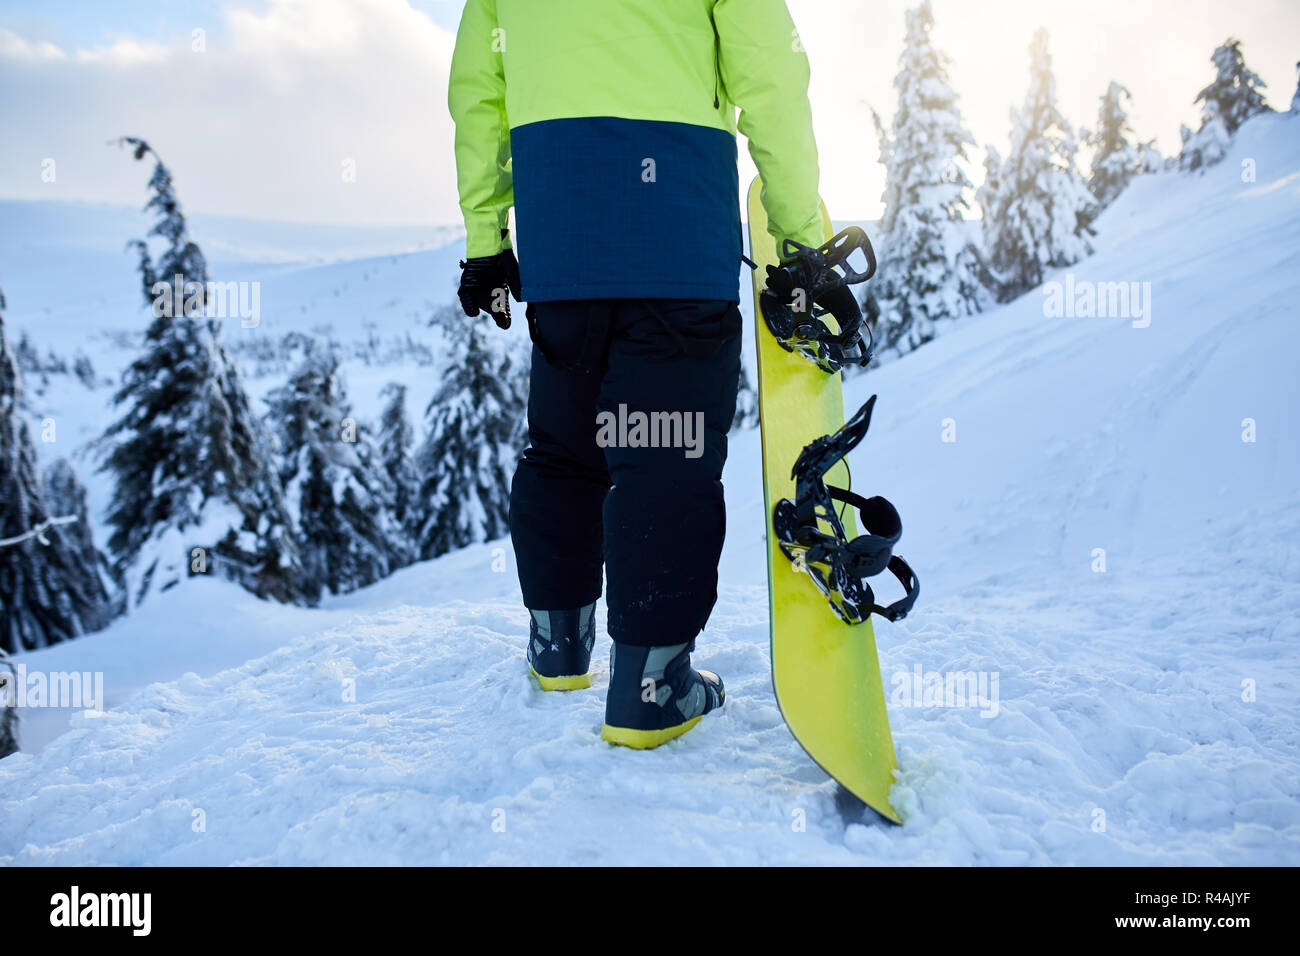 Back view of snowboarder climbing with his board on the mount for backcountry freeride session in the forest. Man with snowboard walking at ski resort. Rider lime fashionable outfit. Stock Photo